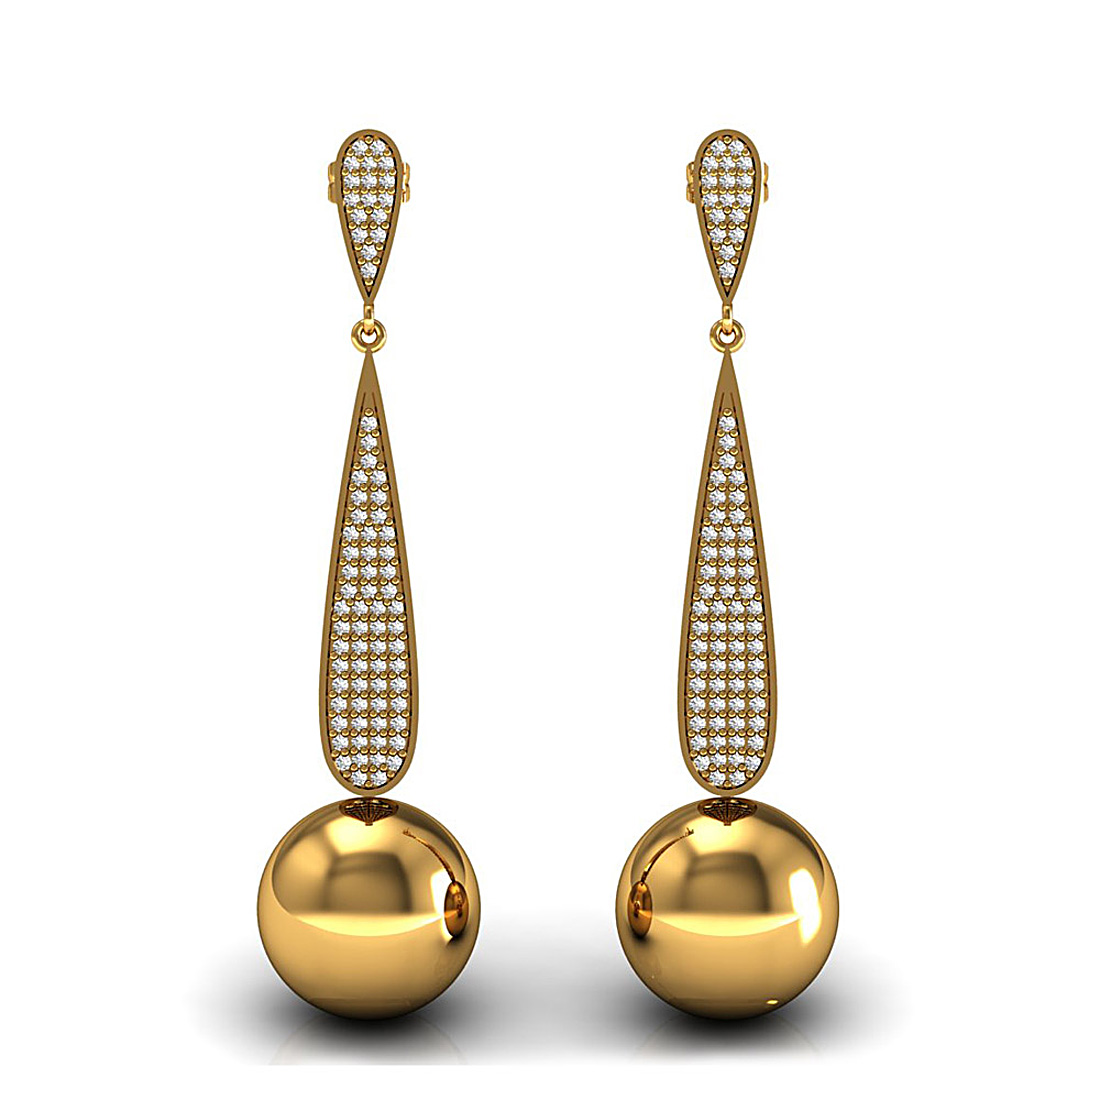 18K solid yellow gold designer dangle drop earrings studded with golden pearl fine jewelry.